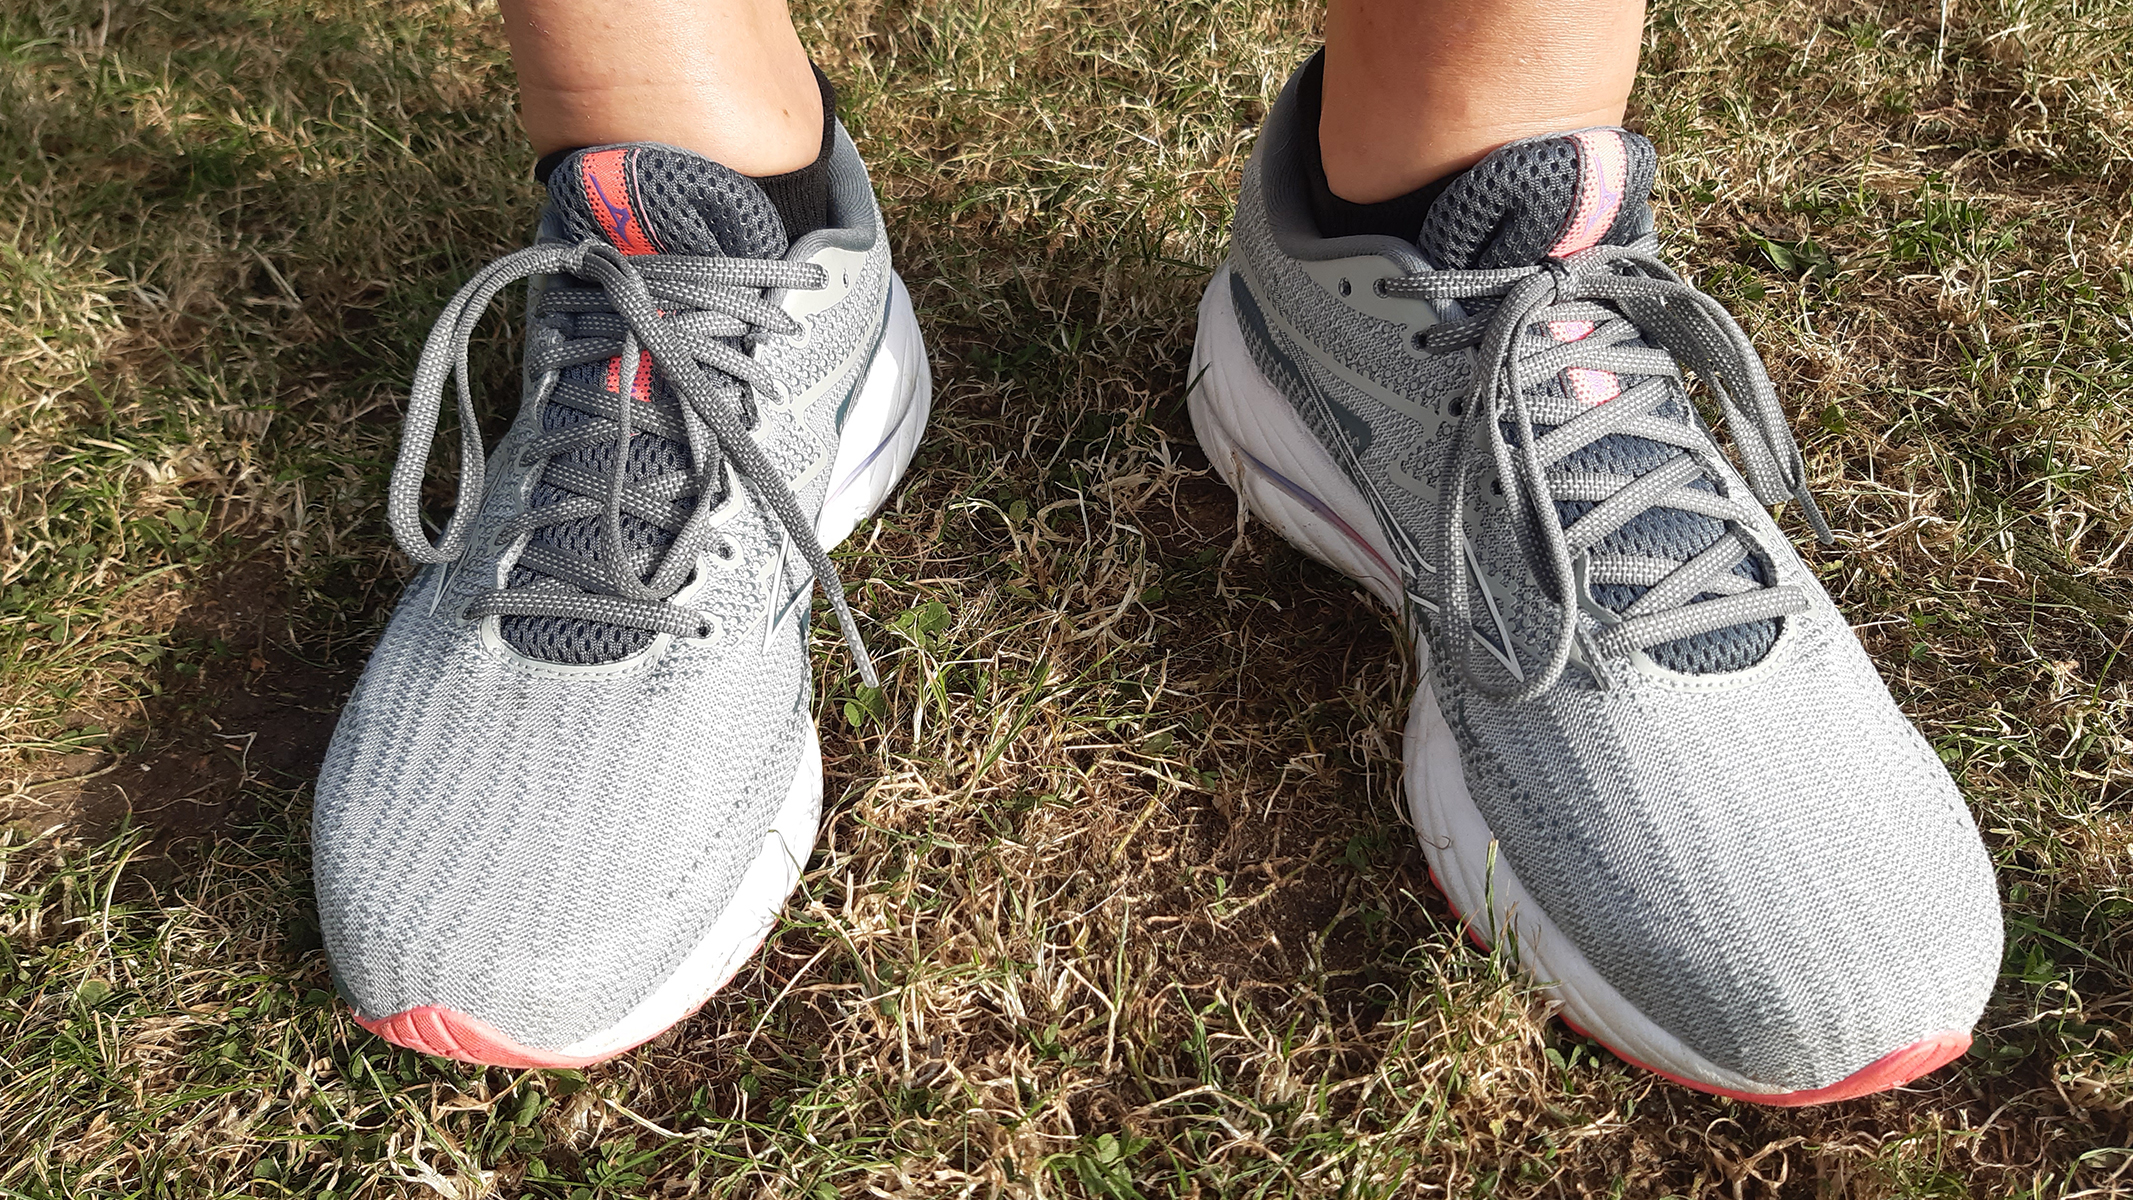 Mizuno Wave Rider 27: Tried and tested